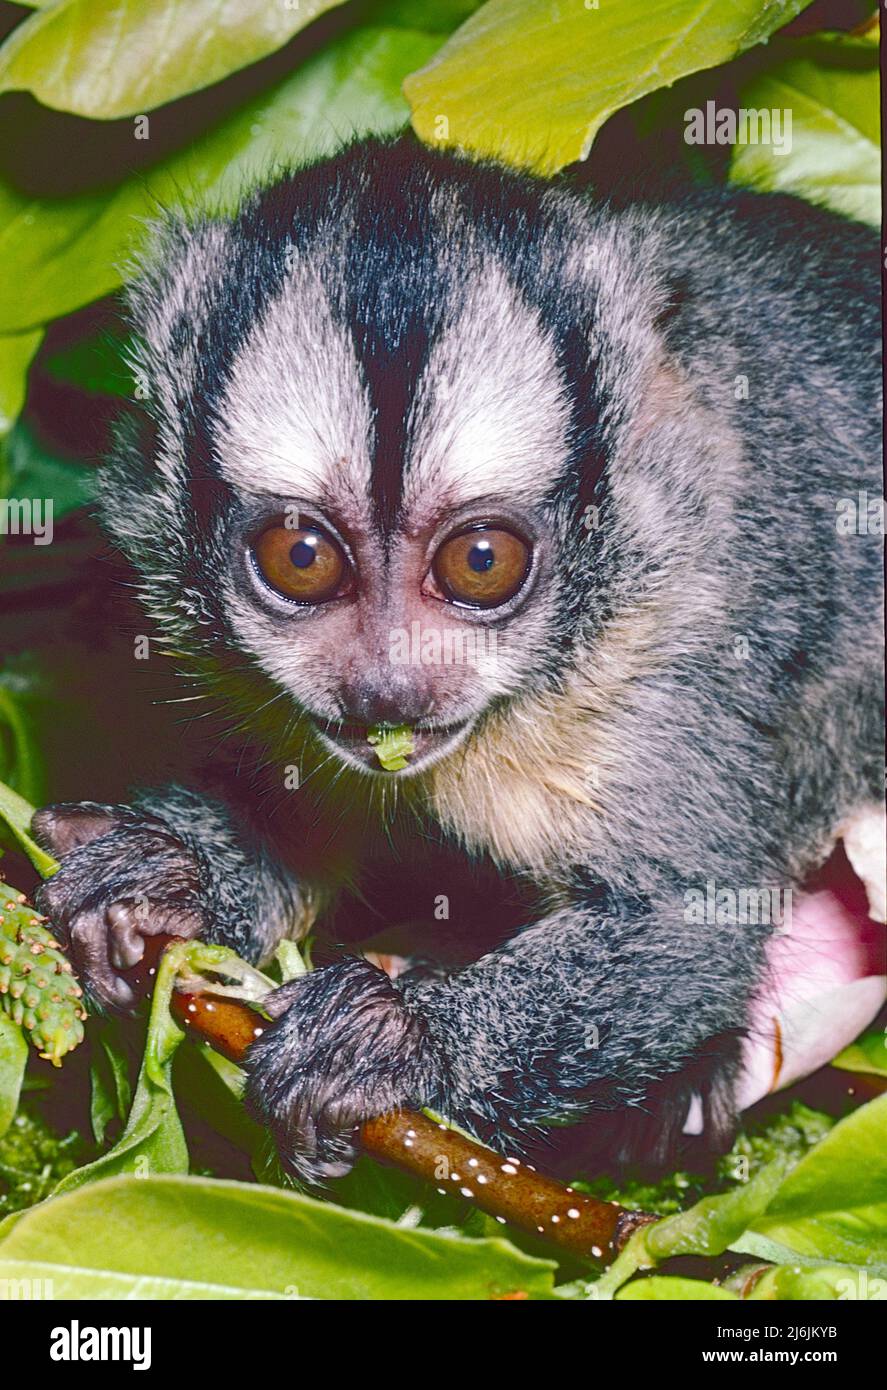 Young Northern Night or Owl Monkey,  (Aotus lemurinus,) from Central and South America.  Listed as Vulnerable. Stock Photo